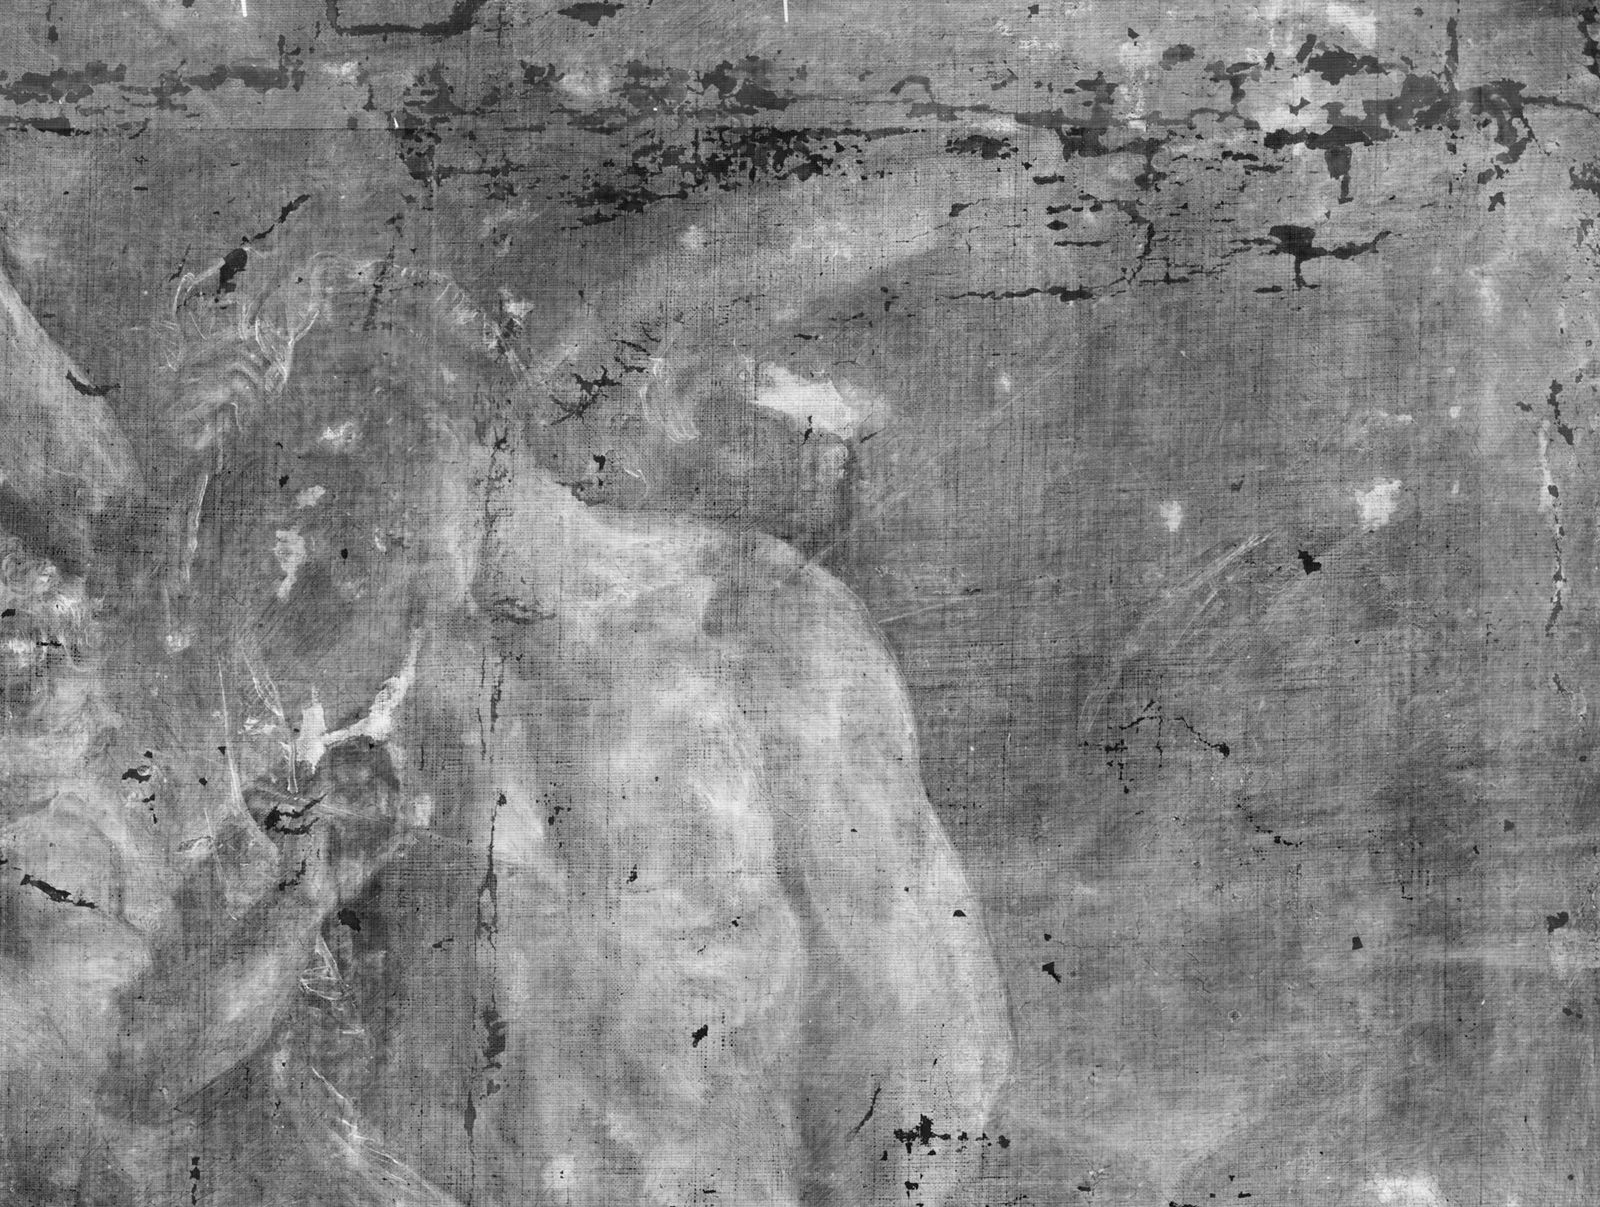 X-Ray analysis revealed Rubens' changes to the painting....